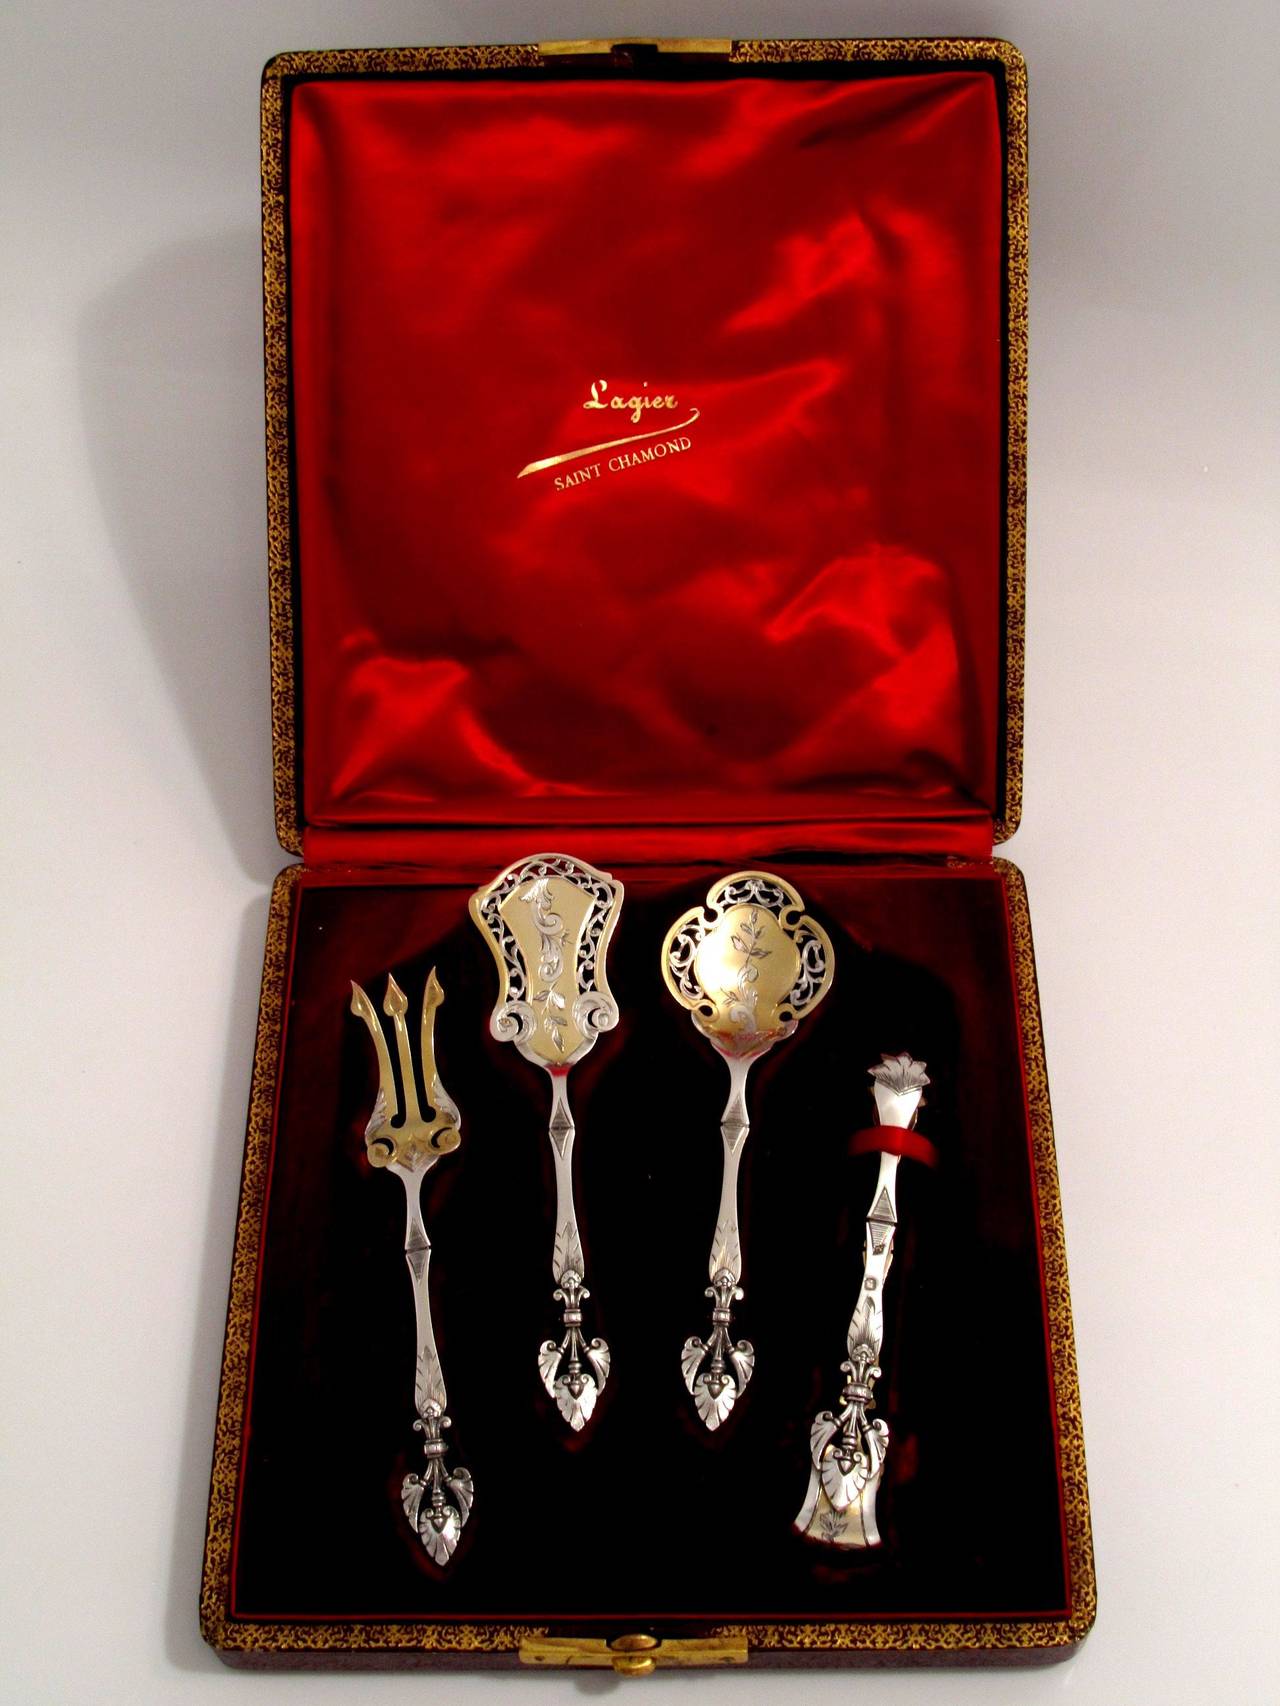 SOUFFLOT Unusual French All Sterling Silver Vermeil Dessert Set 4 pc w/box

Head of Minerve 1 st titre for 950/1000 French Sterling Silver Vermeil guarantee

A set of truly exceptional quality, for the richness of its decoration, its form and